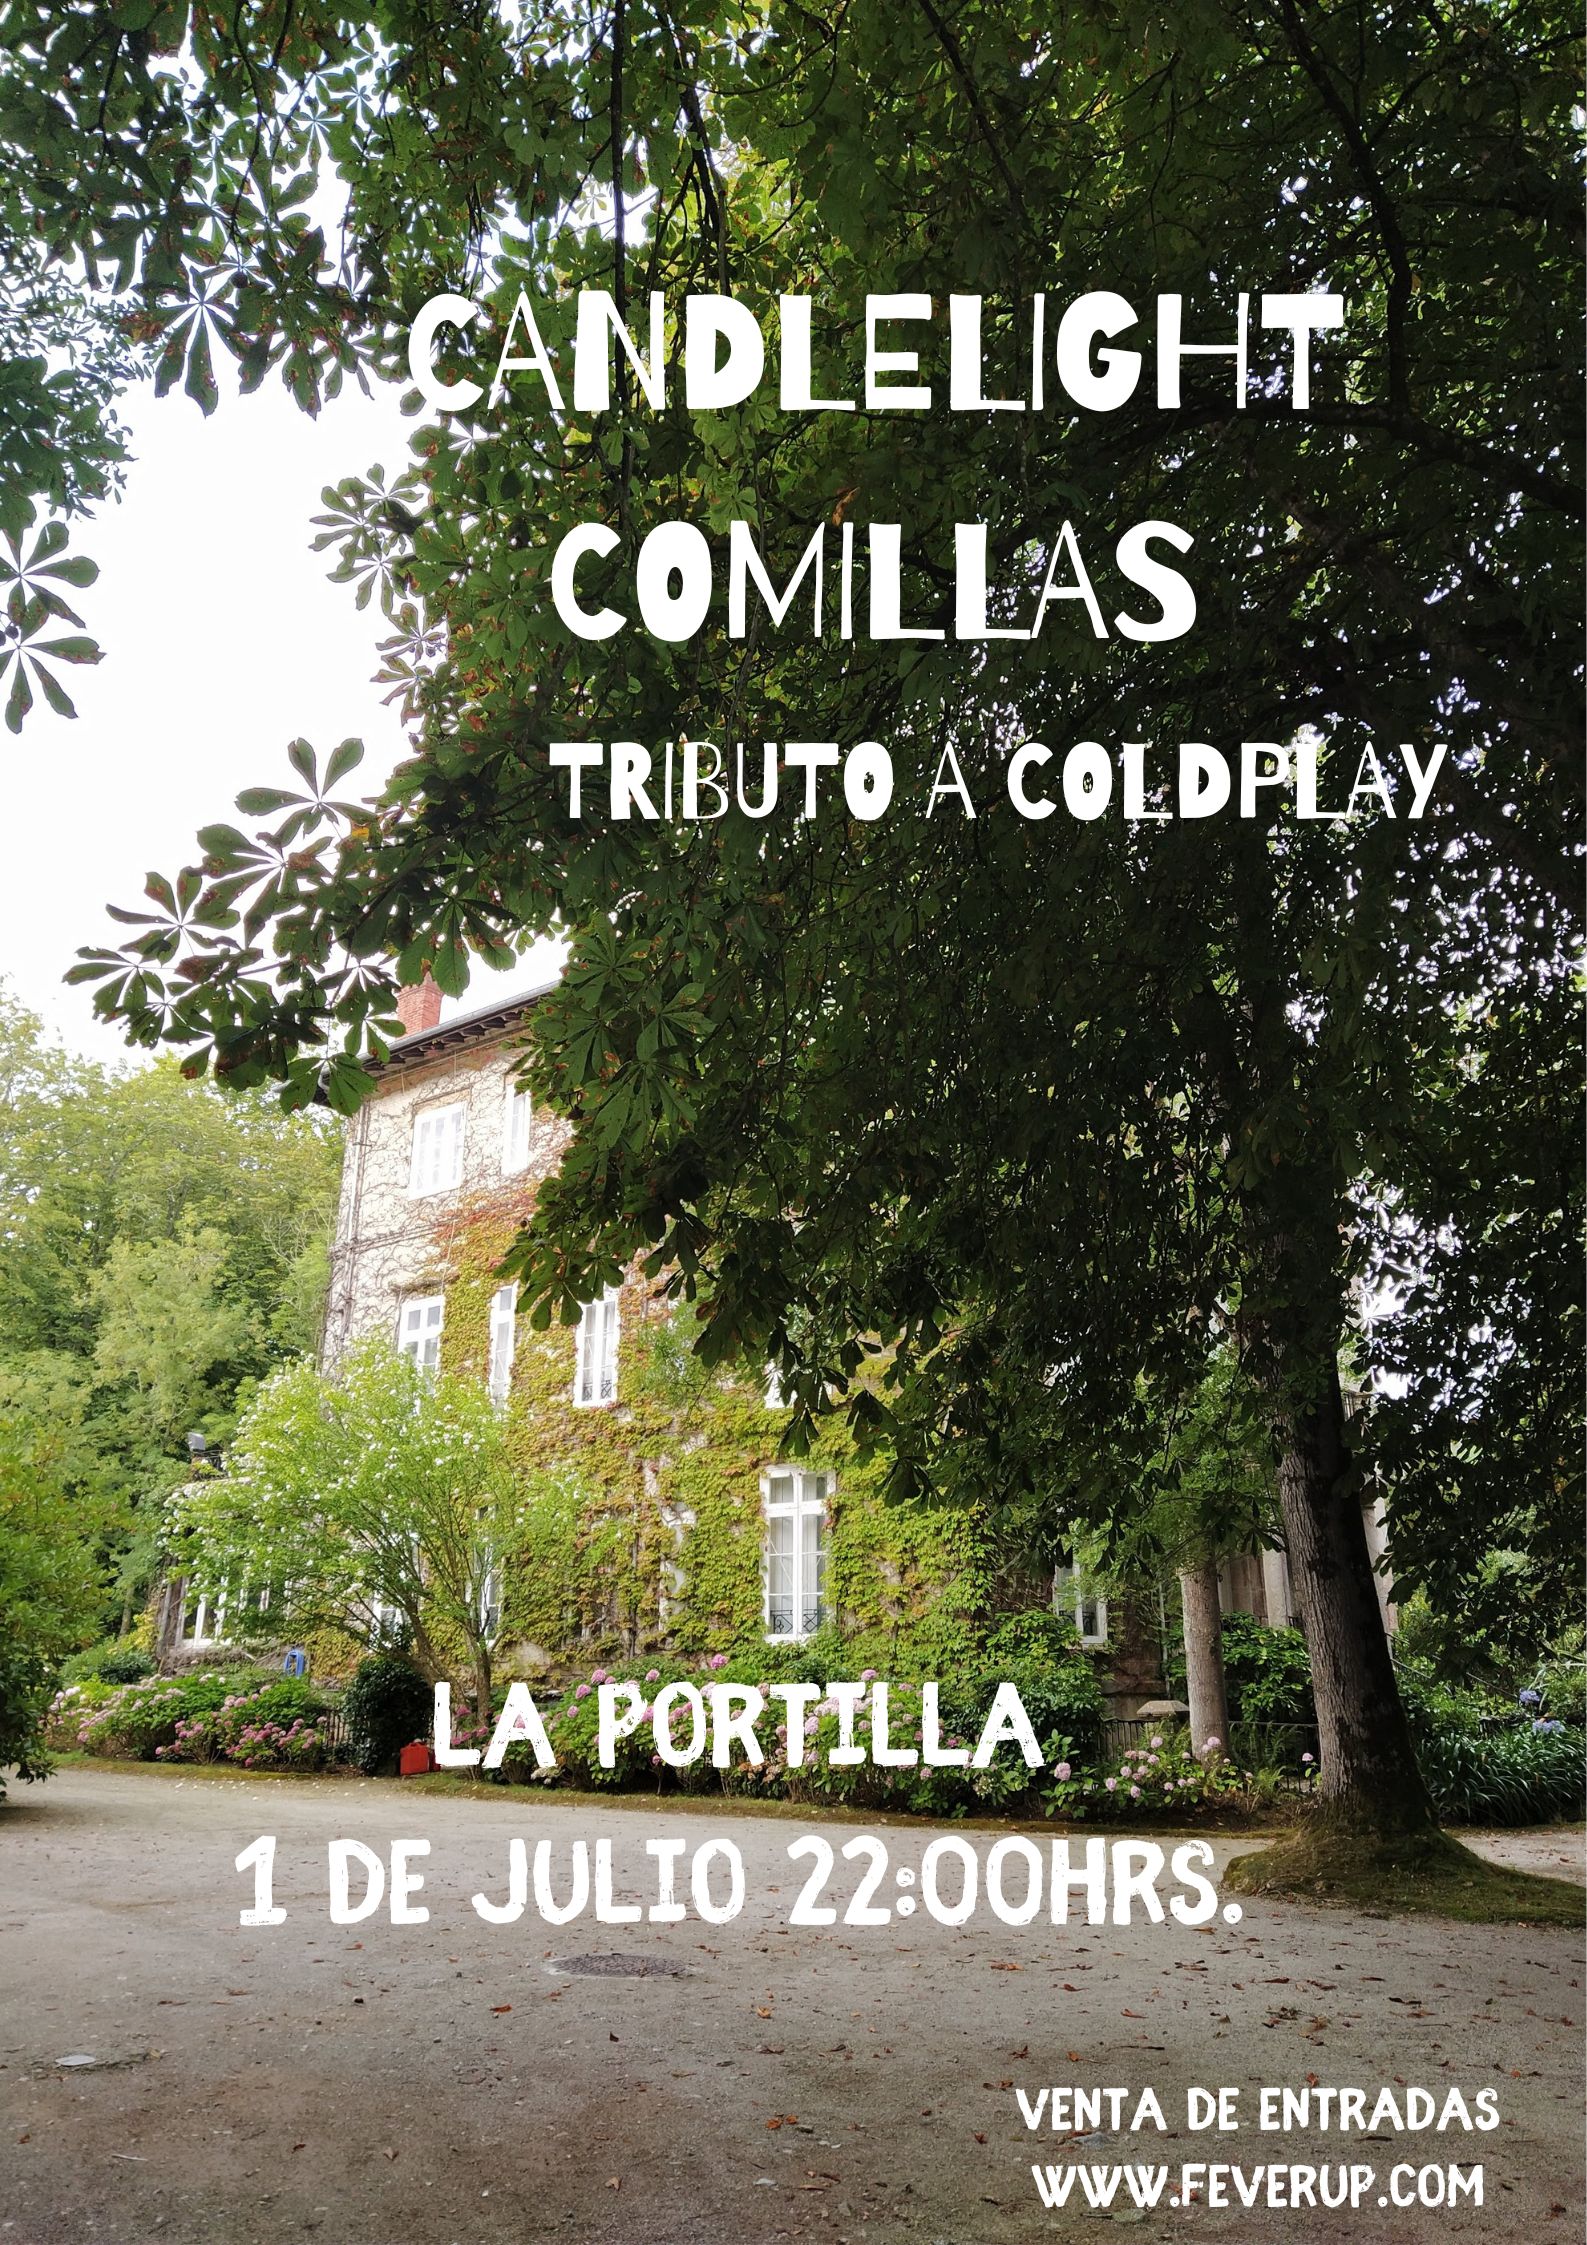 CANDLELIGHT COMILLAS: TRIBUTO A COLDPLAY